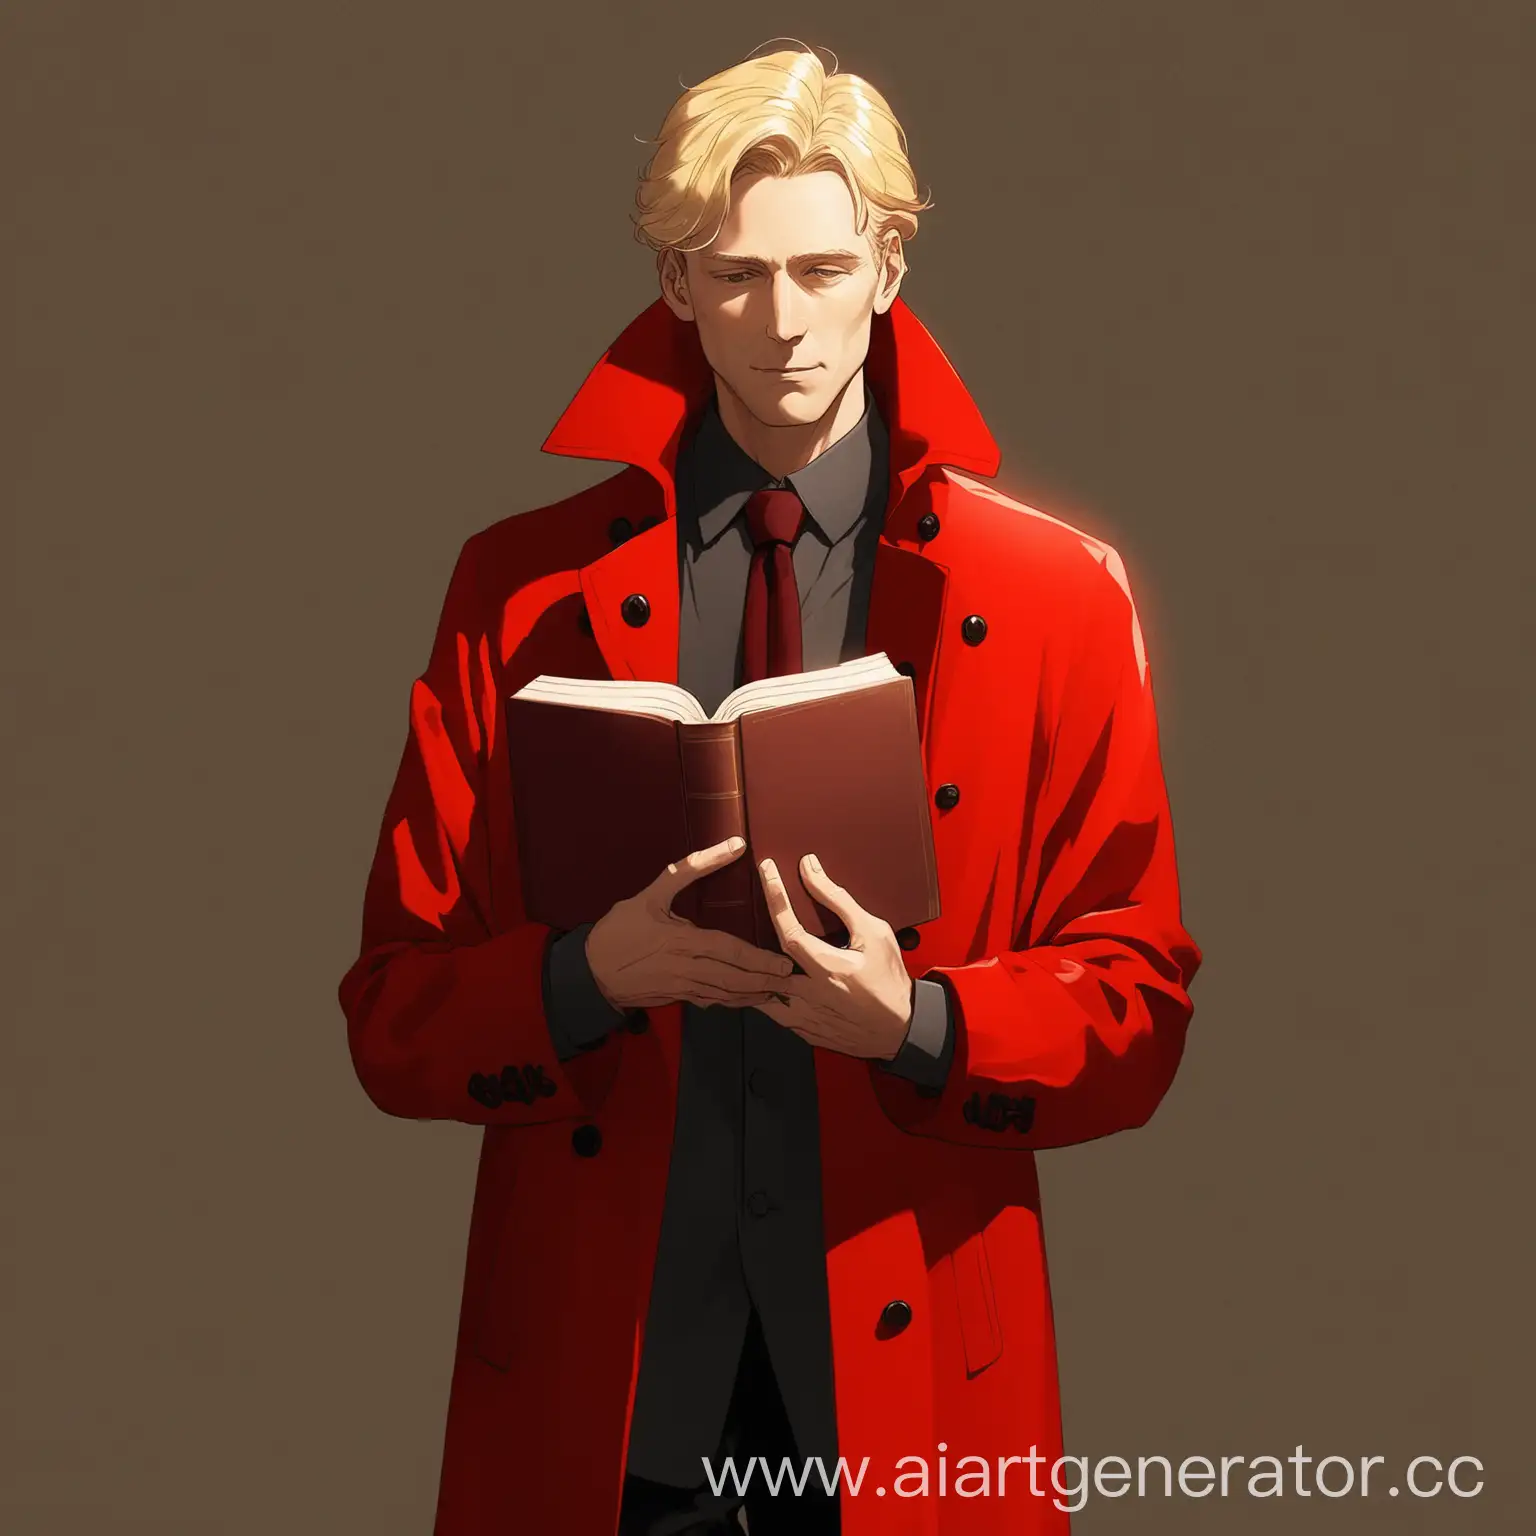 Tall-Blonde-Man-Holding-a-Book-in-Red-Coat